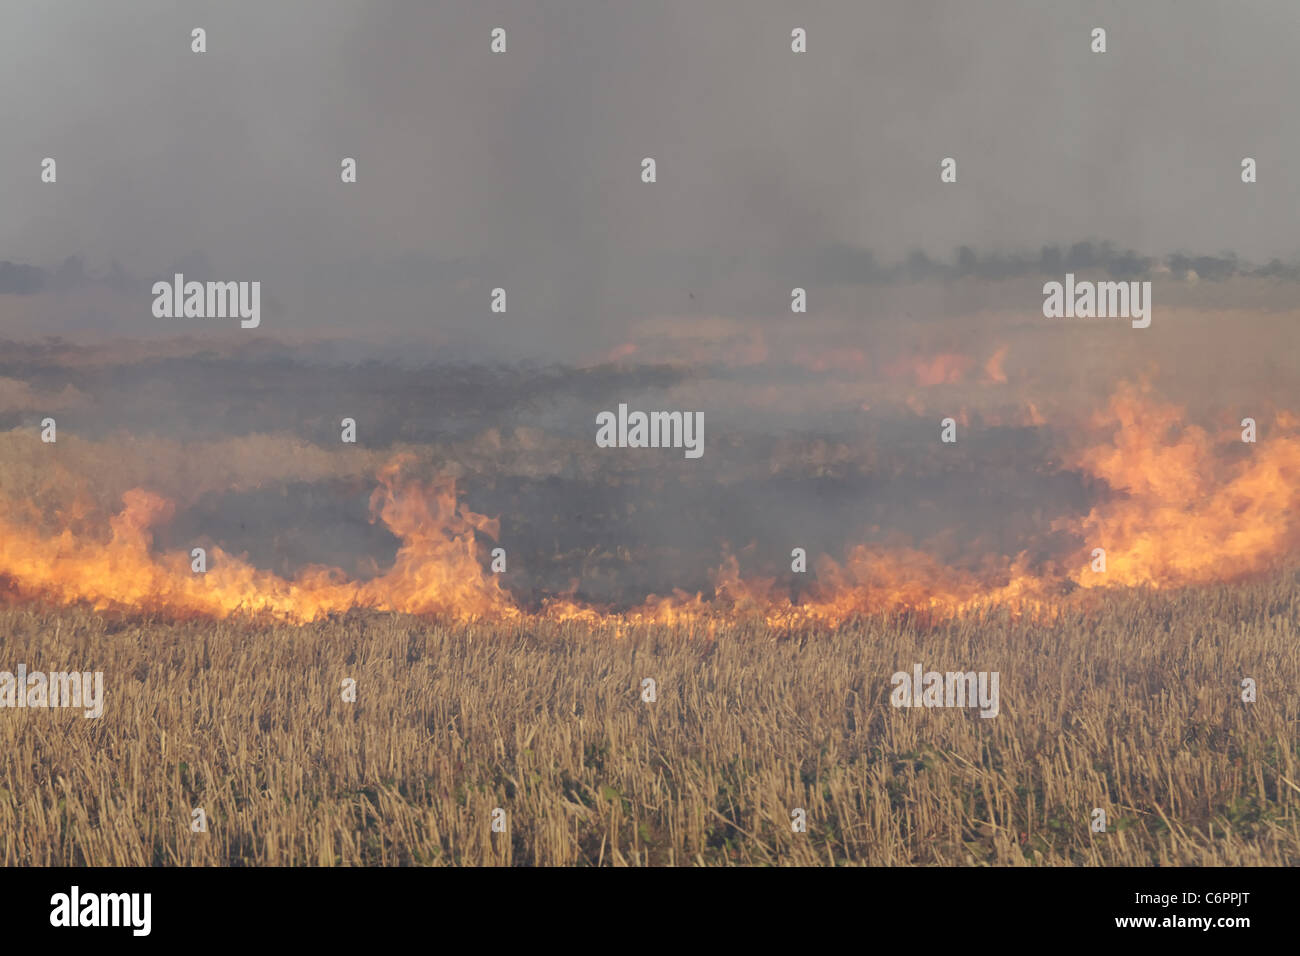 fire in the field of wheat stubble Stock Photo